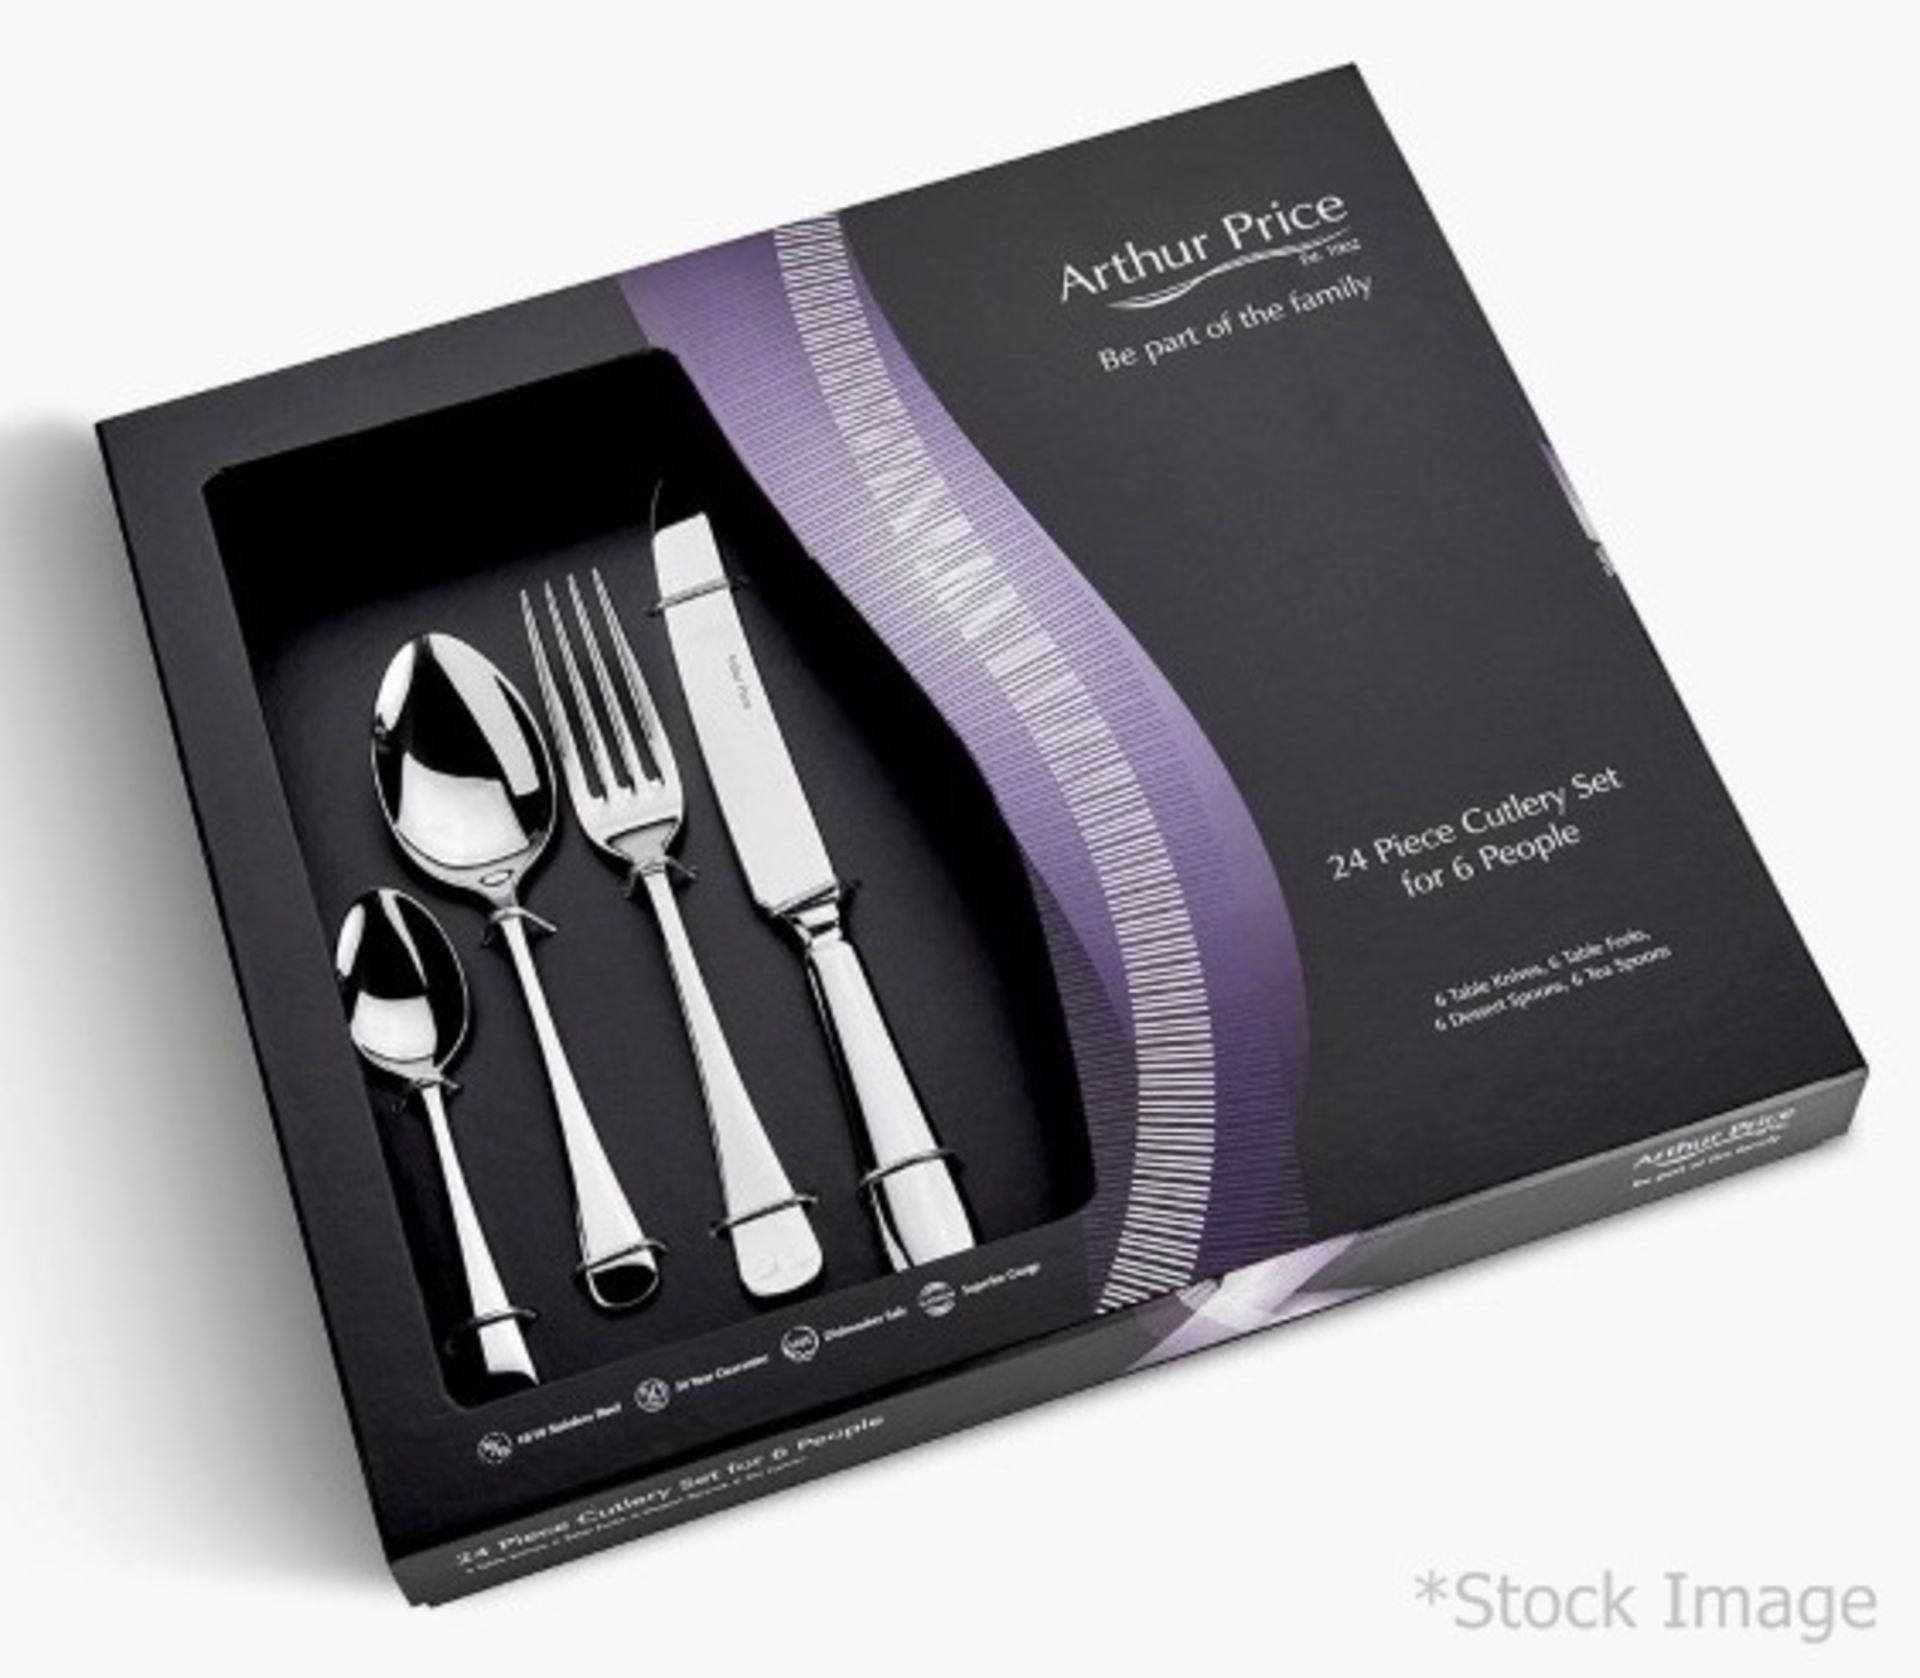 15 x Pieces Of ARTHUR PRICE Stainless Steel Cutlery - Unused Boxed Stock - Ref: HHW328/NOV21/WH2/